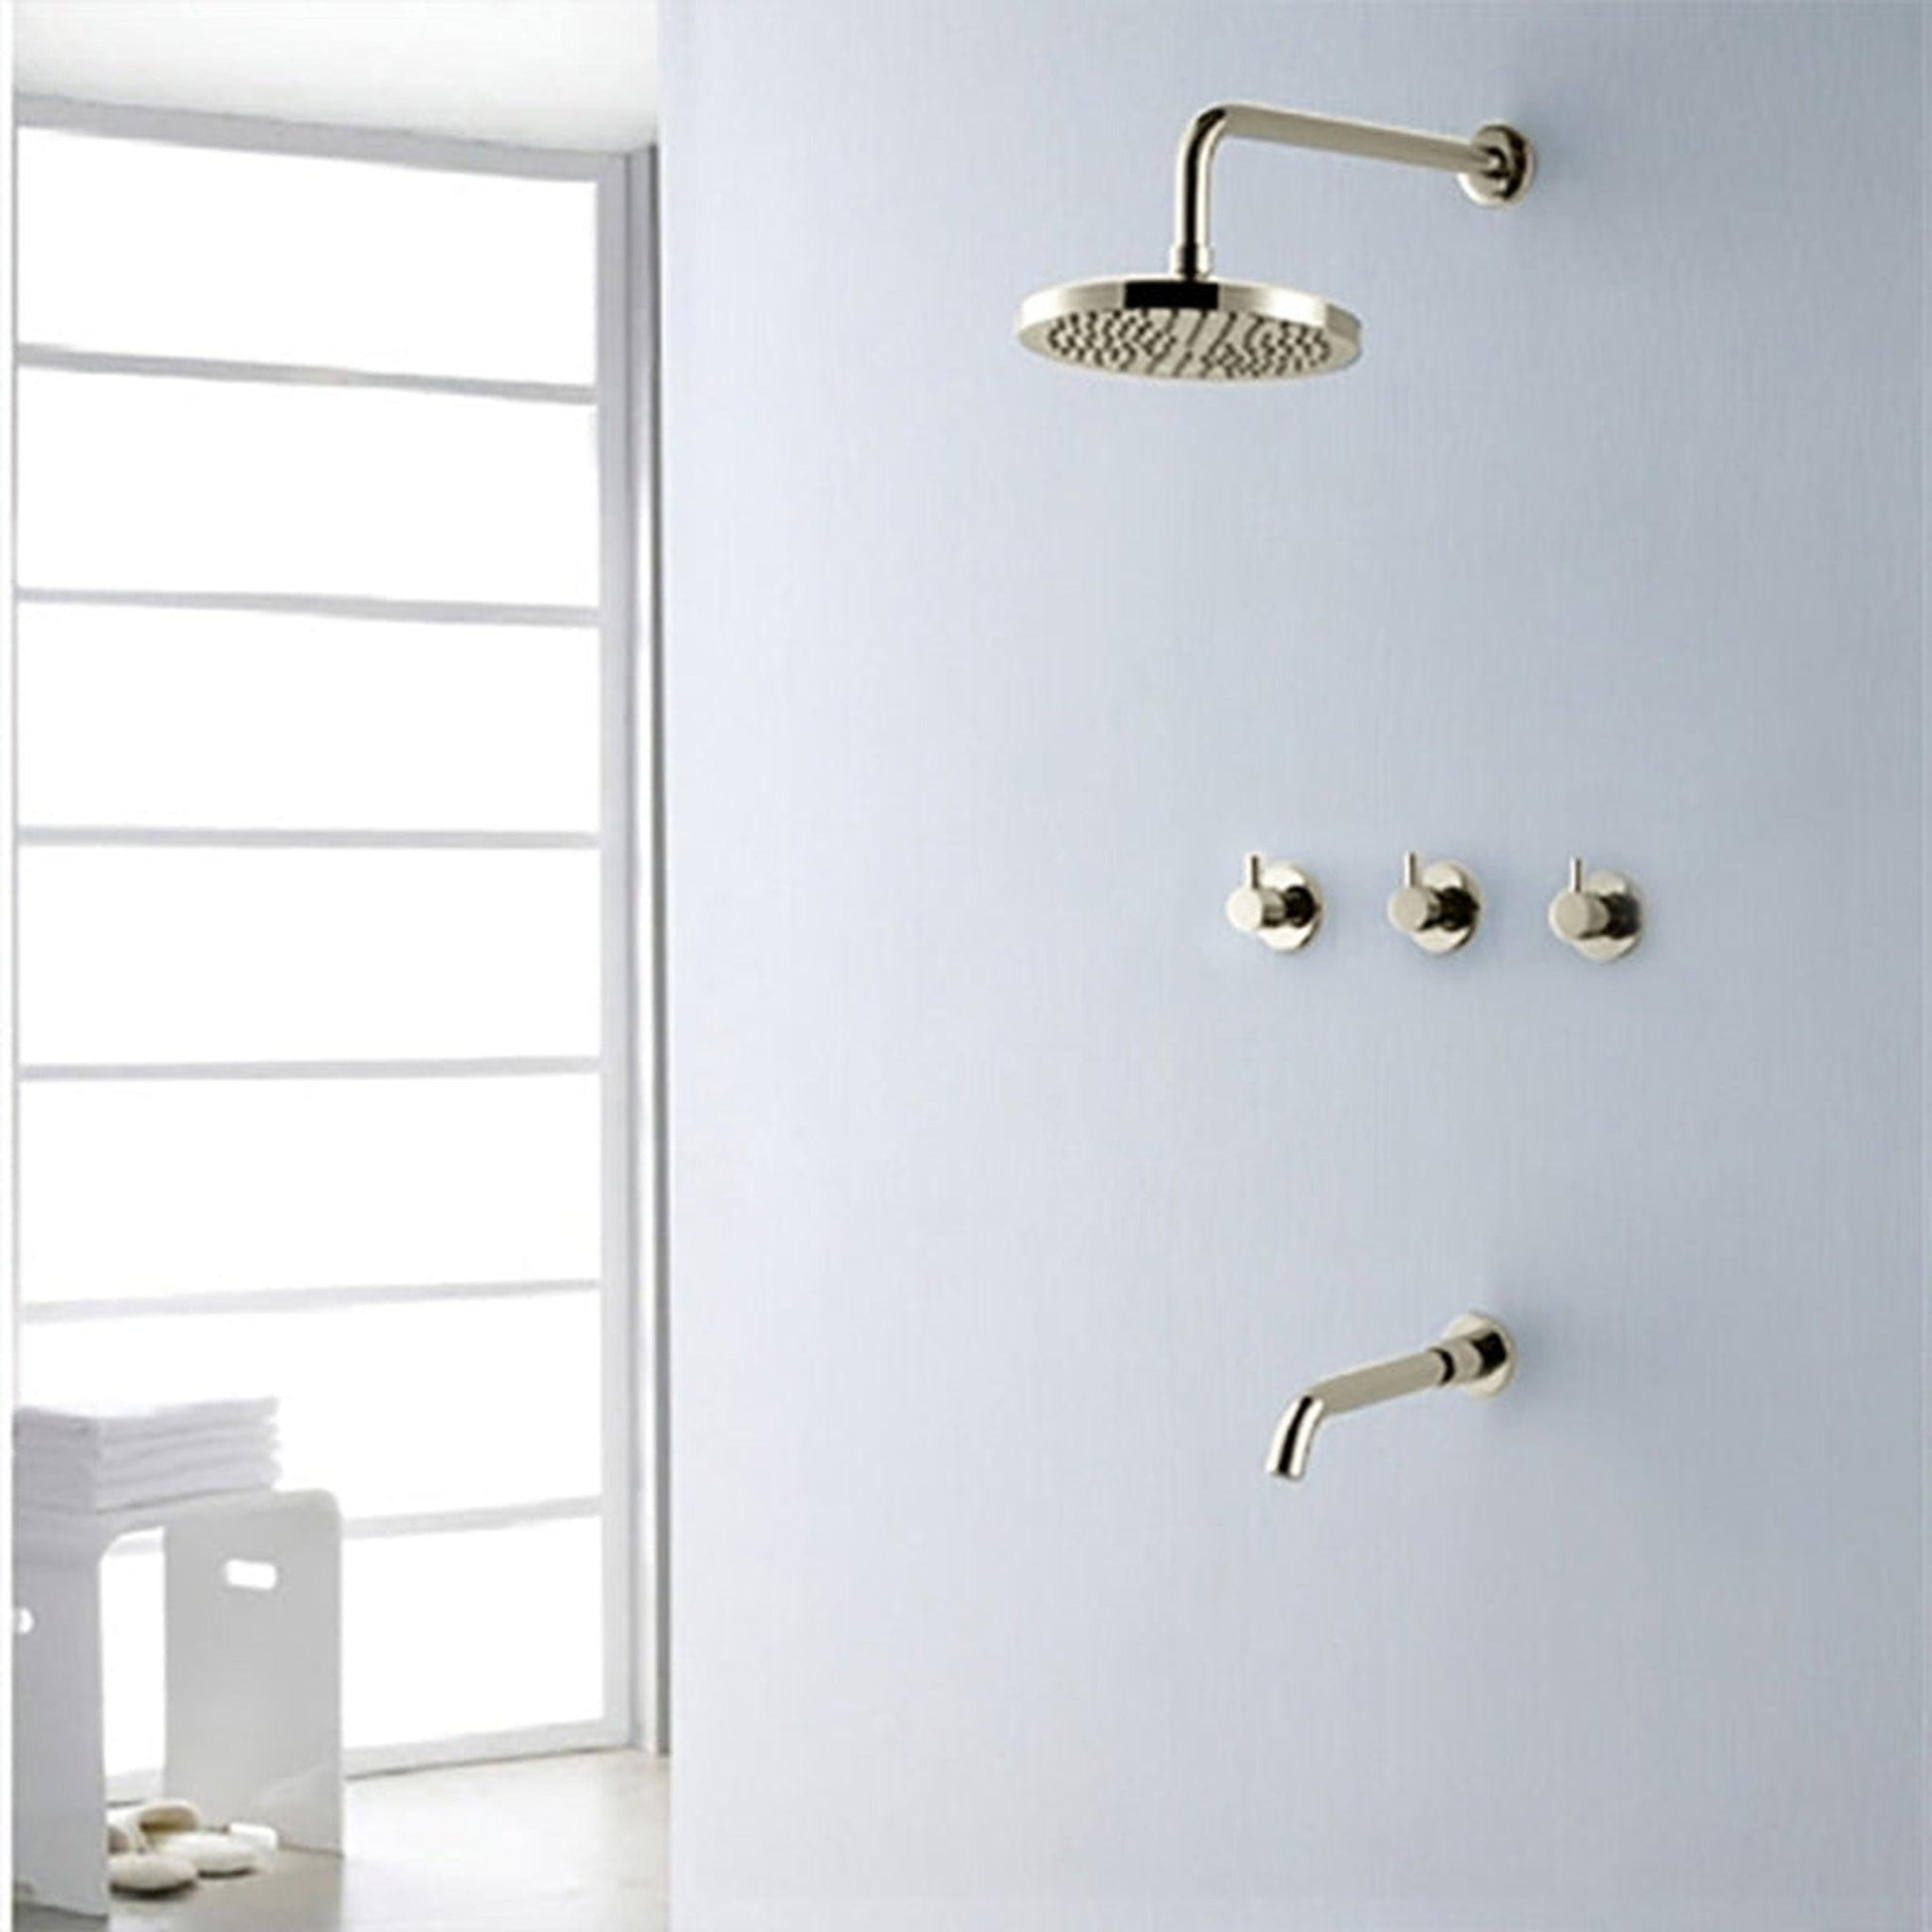 Fontana Oceana 10" Brushed Nickel Round Ceiling Mounted Rainfall Shower Head Faucet Set With or Without Water Powered LED Lights